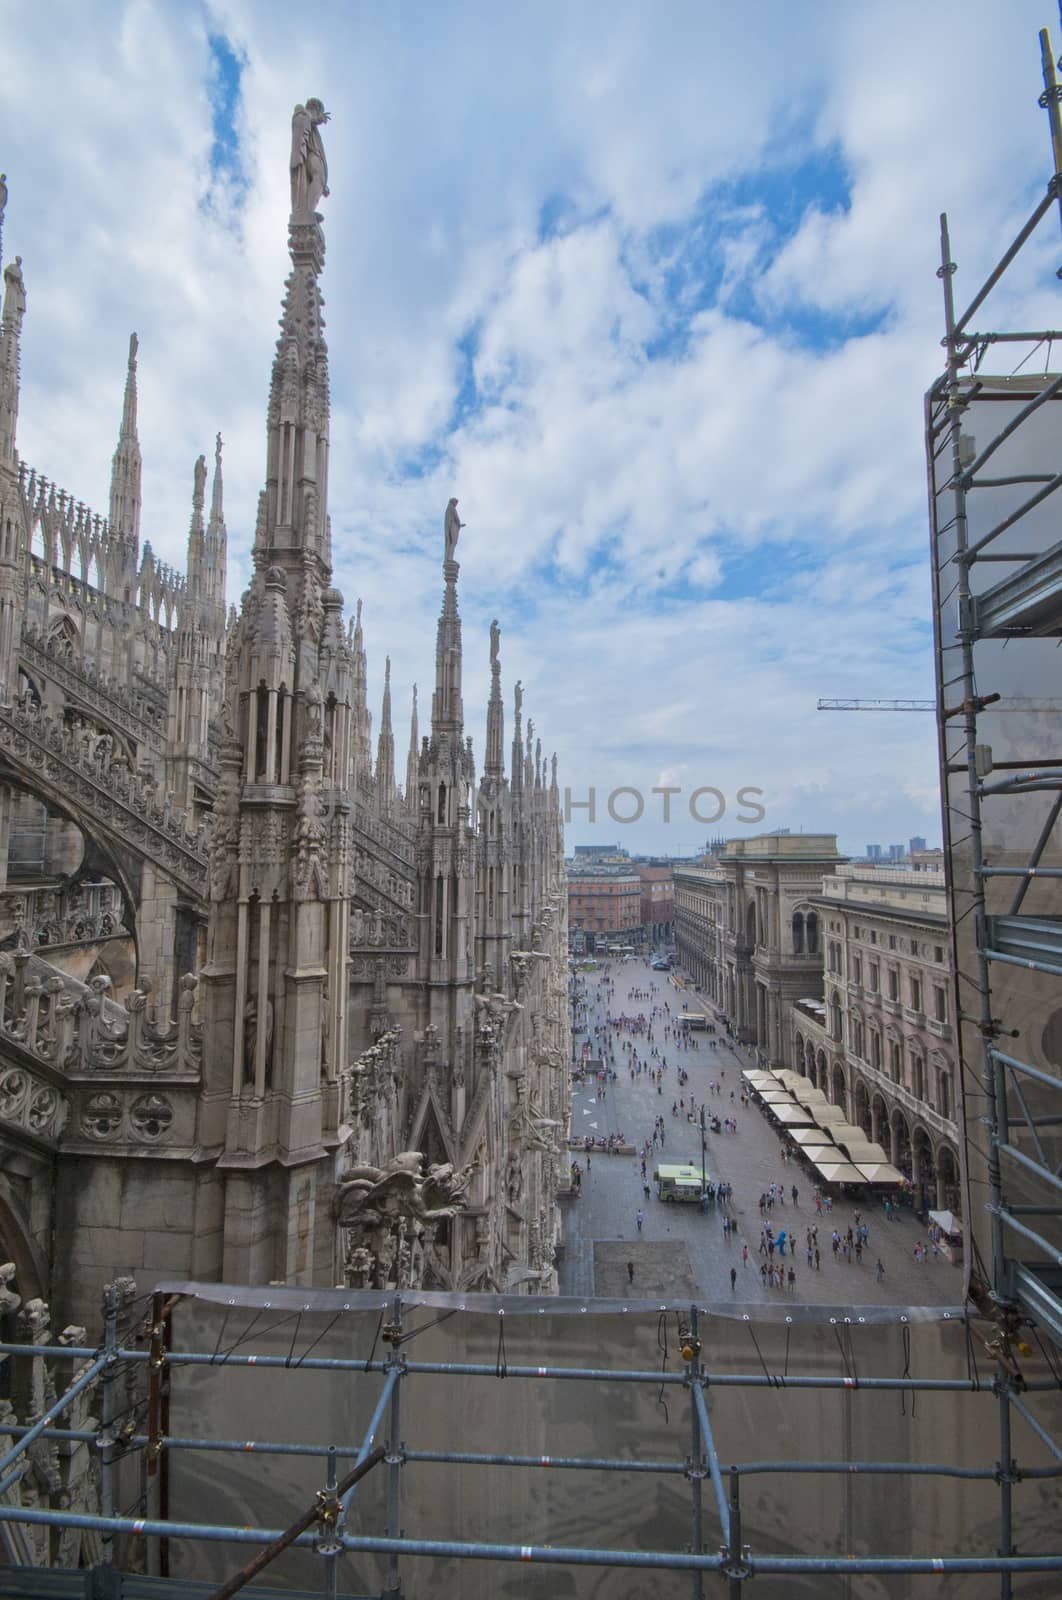 Milan Cathedral by Yorgy67